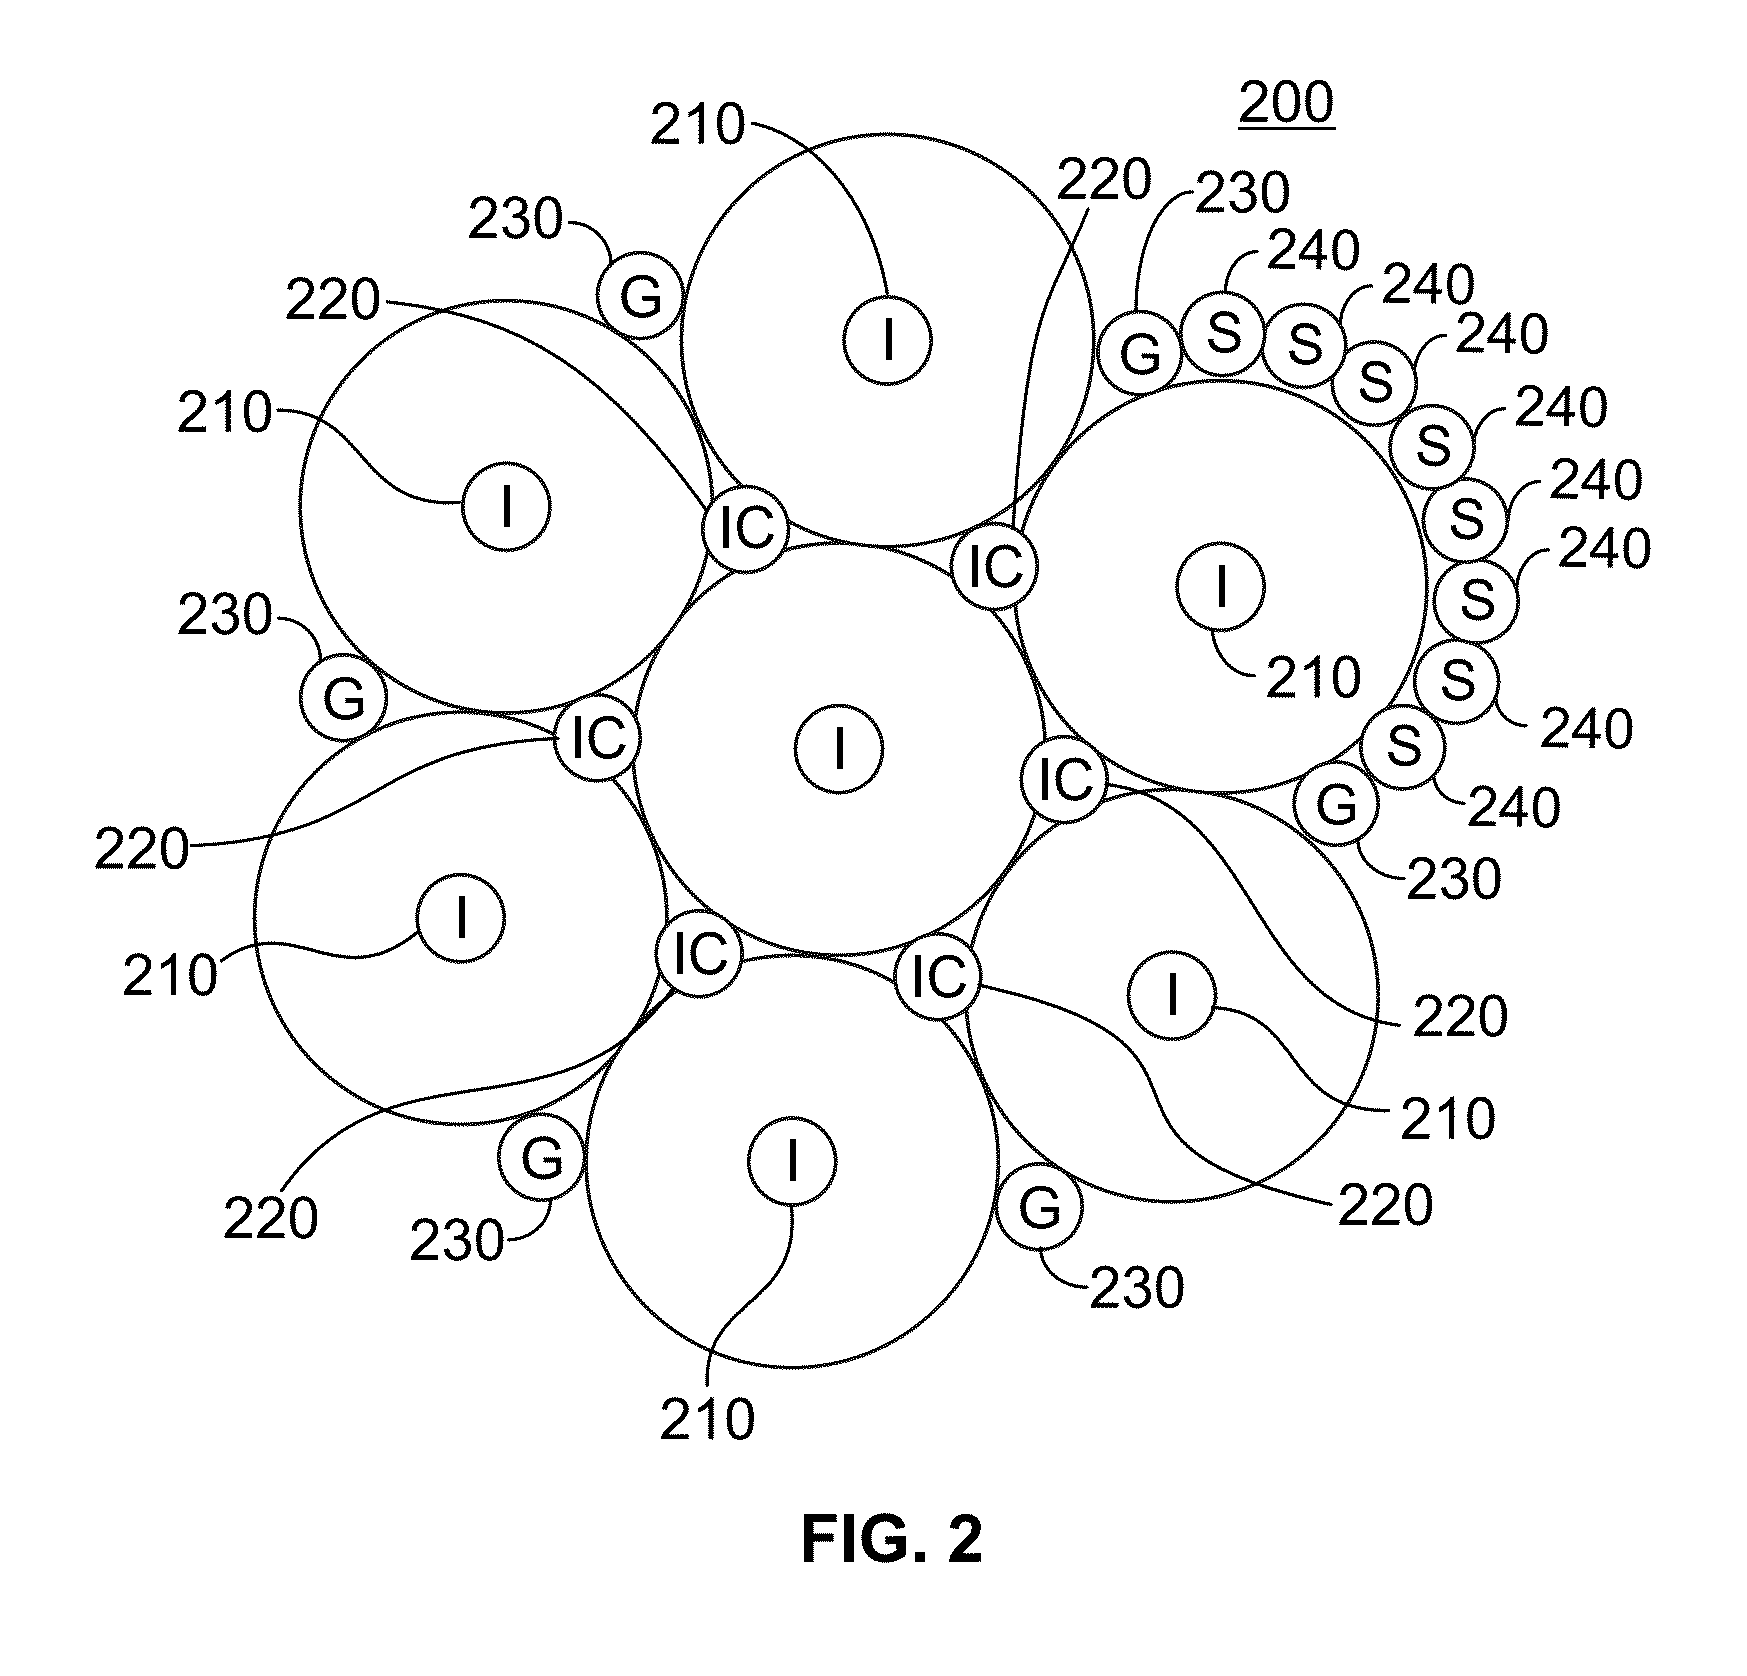 Carbon nanotube conductor with enhanced electrical conductivity